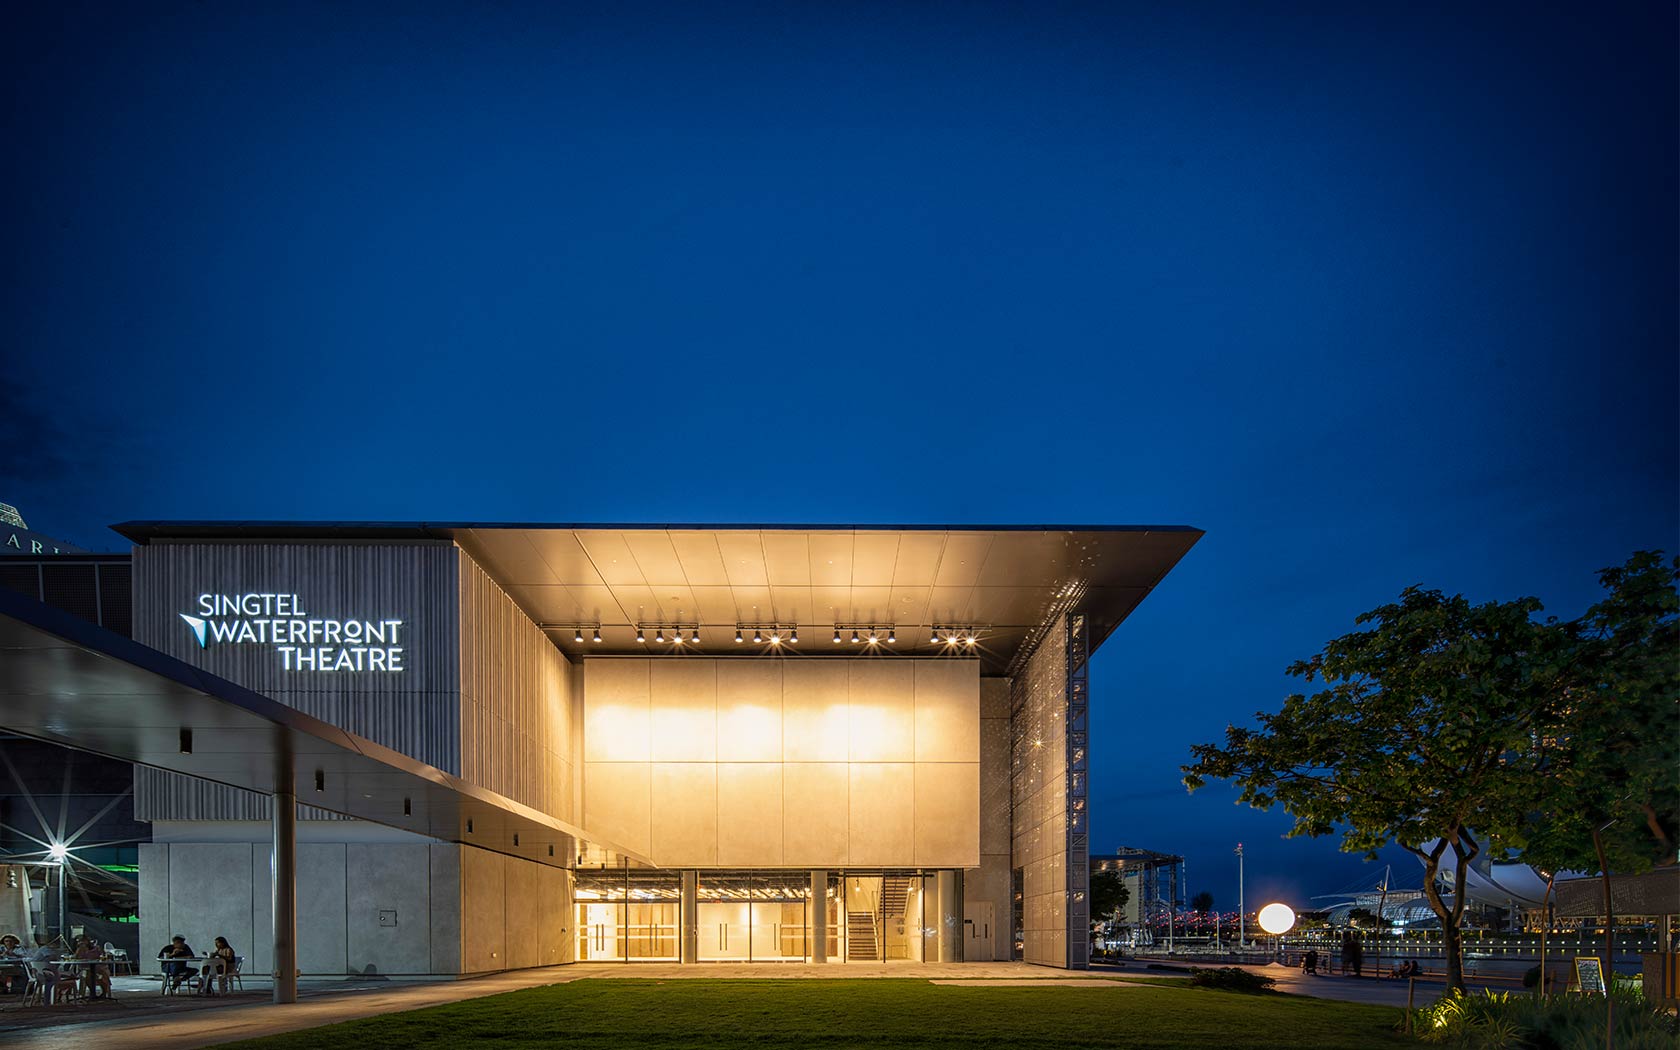 Image of the exterior of the Singtel Waterfront Theatre at night.